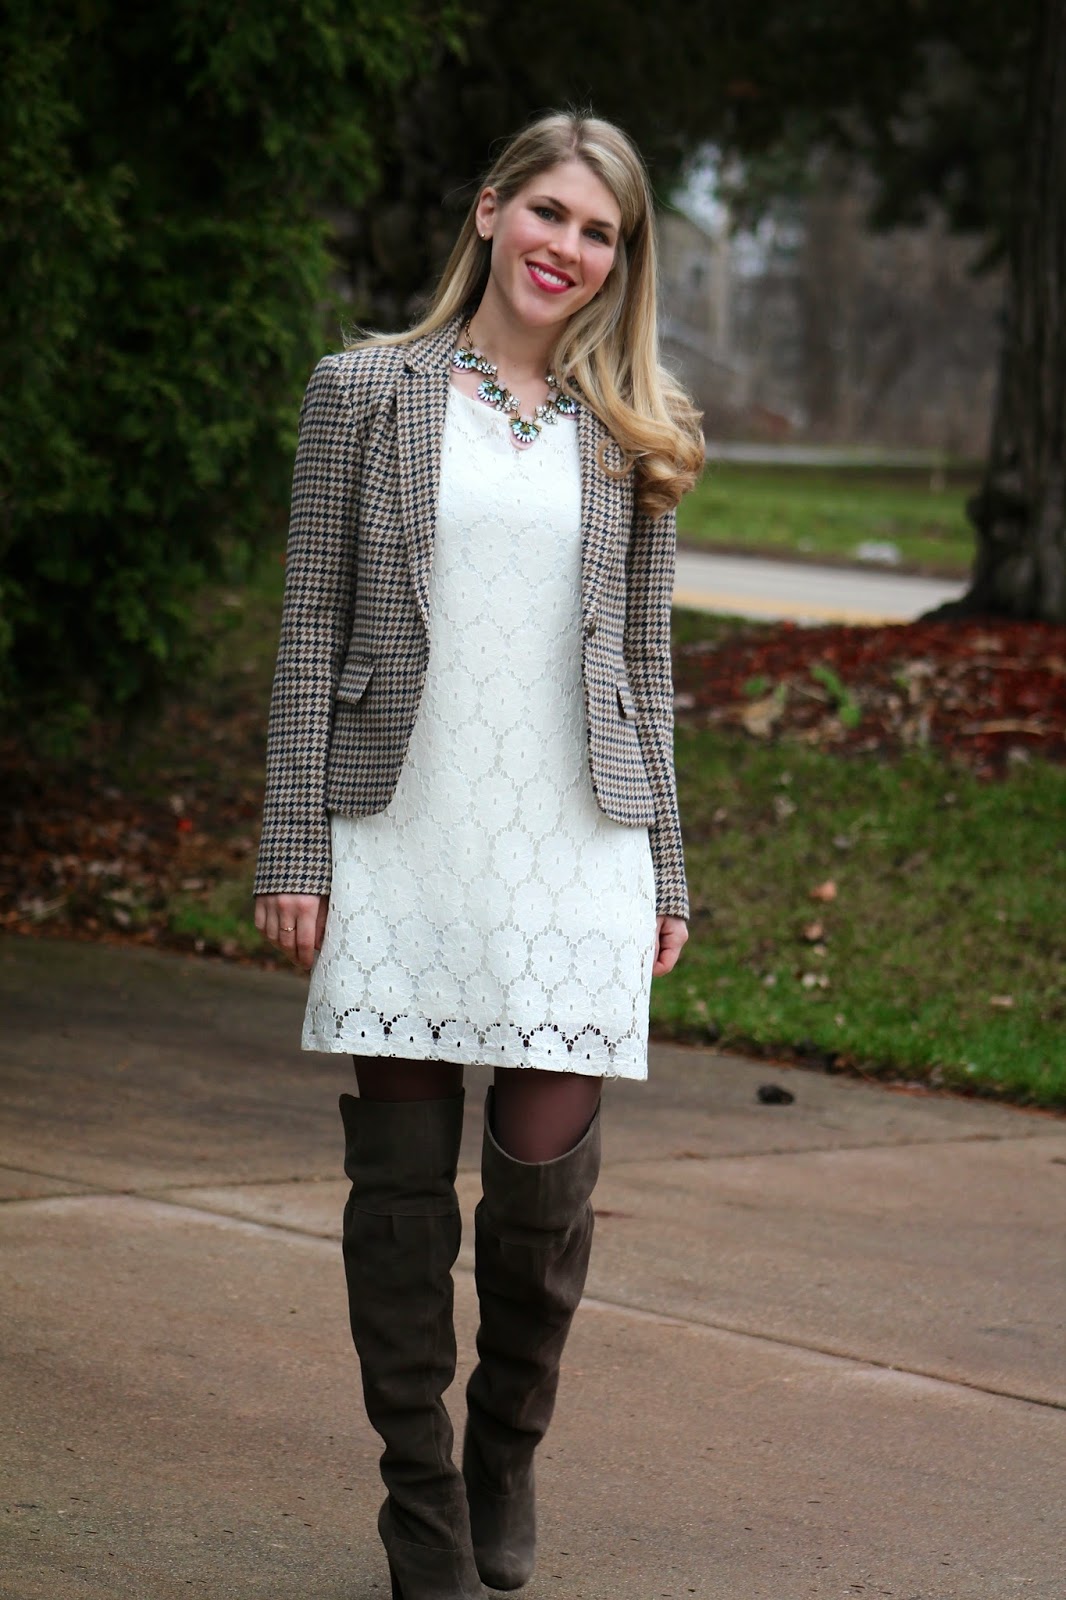 Confident Twosday: Lace Dress and Houndstooth Blazer